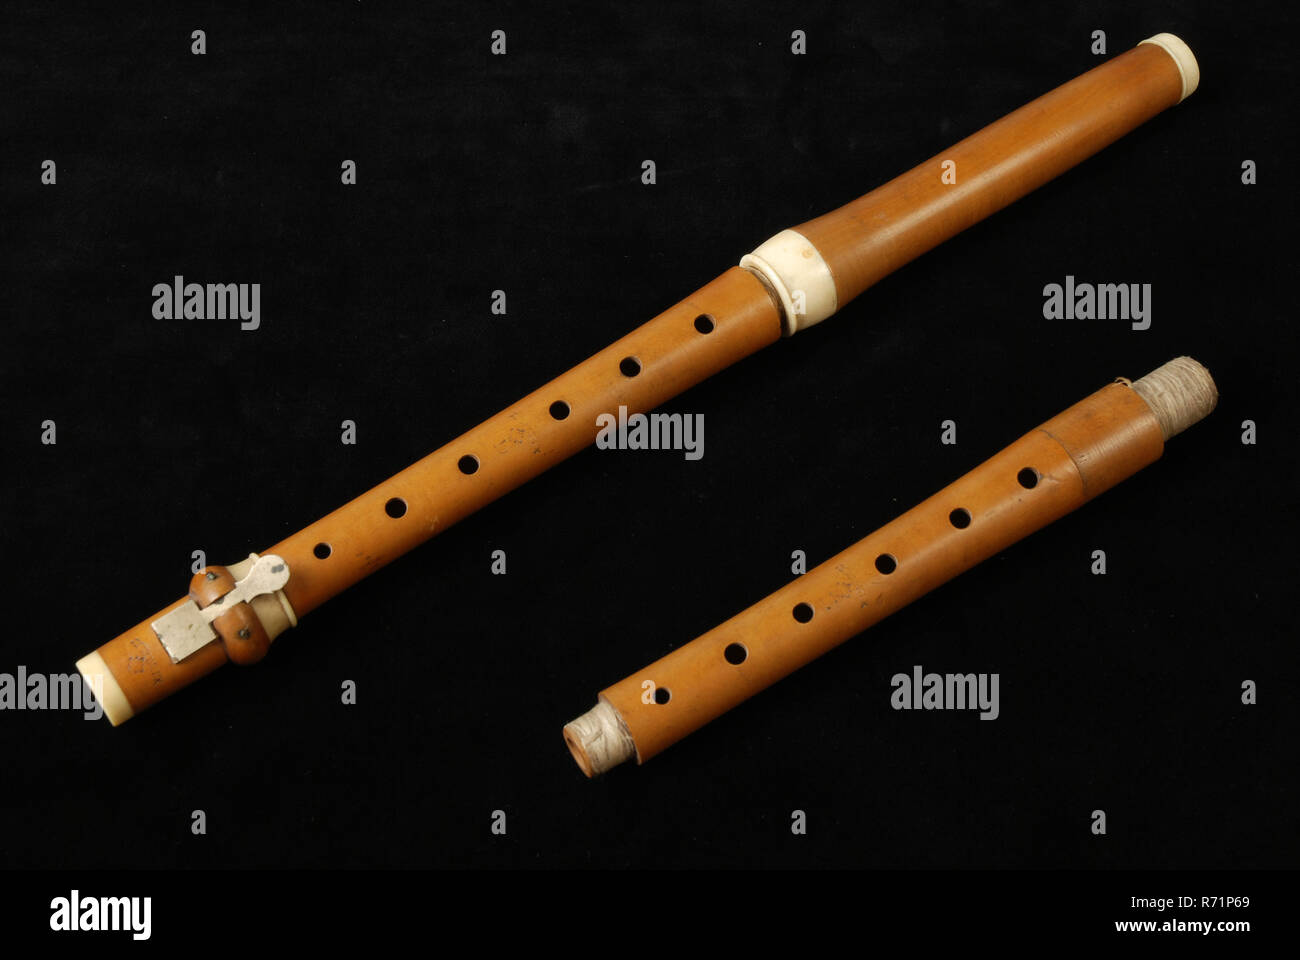 Tuerlinckx, Three-part wooden flute with additional spacer, flute flute aethiop musical instrument acoustic palm wood? wood copper metal ivory, twisted drift Wooden flute in three parts with ivory pieces. The middle section, has six tone holes and has an indication of pitch D The seventh finger hole on the pedestal, is covered by brass flap for the little finger The mouthpiece (C) has an old registration number. The extra spacer (D) called 'corps de rechange' is made in pitch E but probably later modified. All parts are branded burnt in: TUERLINCKX with floral pattern whistle music concert lei Stock Photo